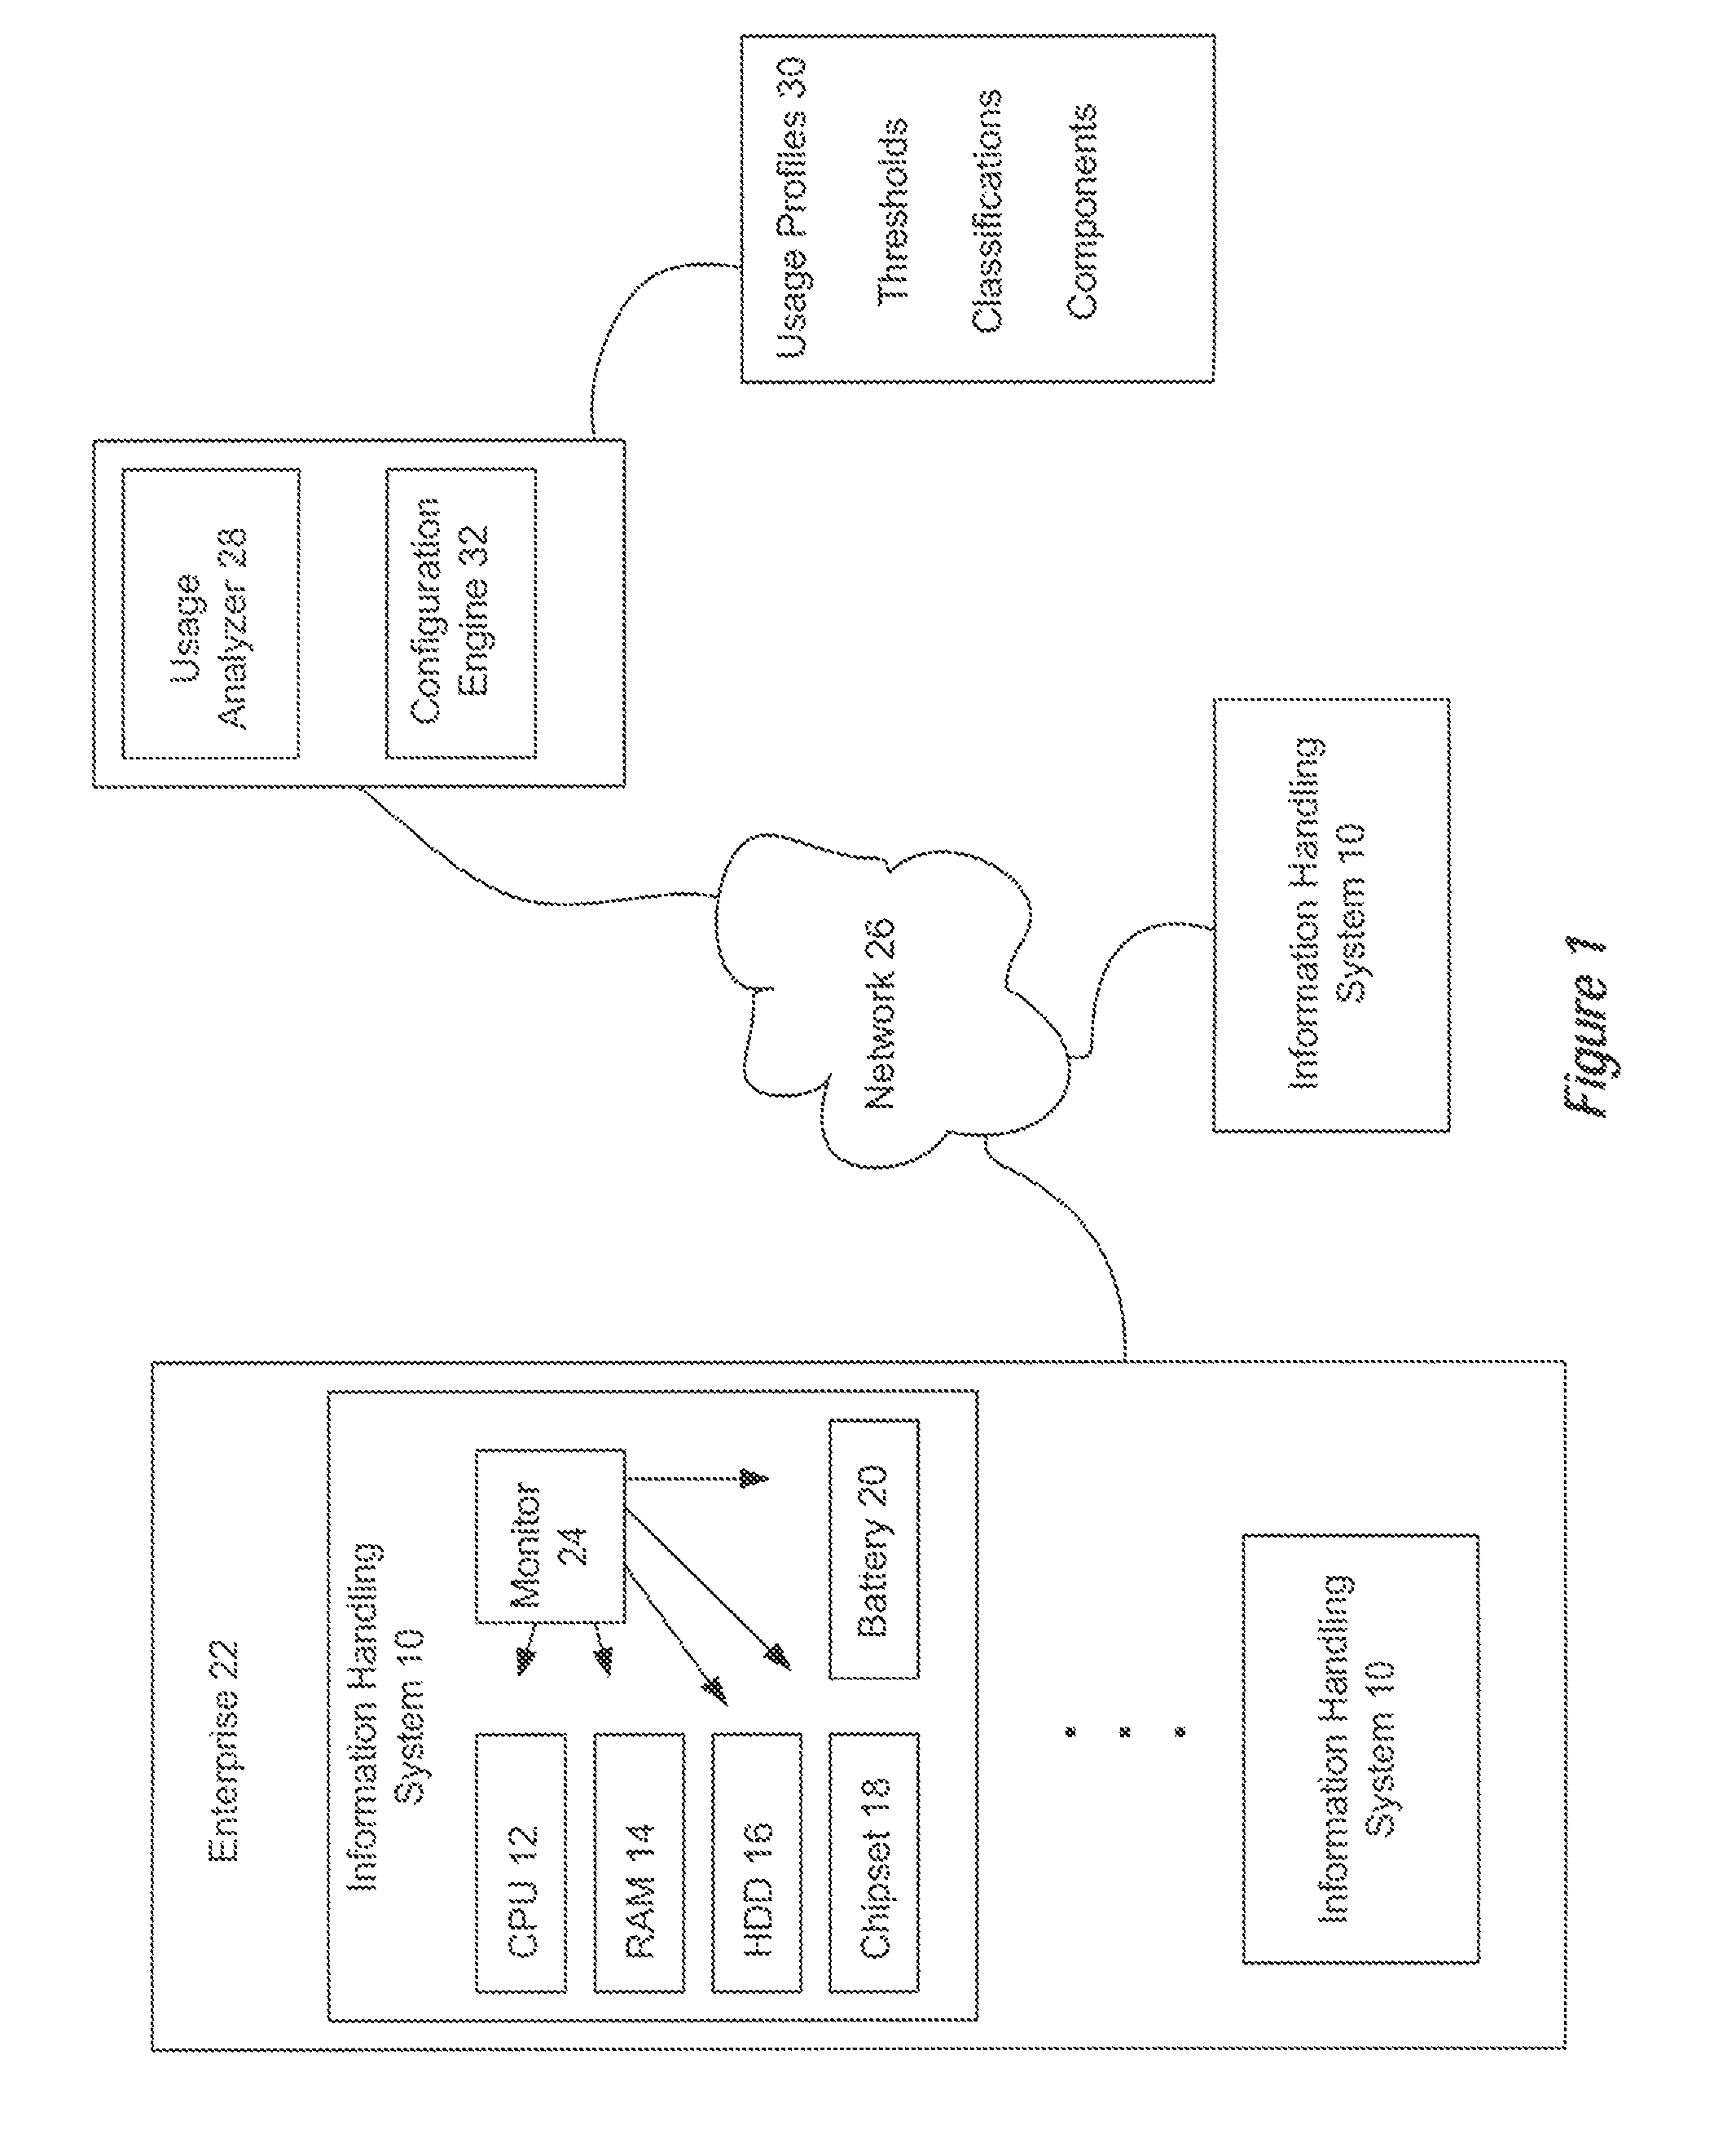 System and method for customizing information handling system product and service offerings based on usage profiles